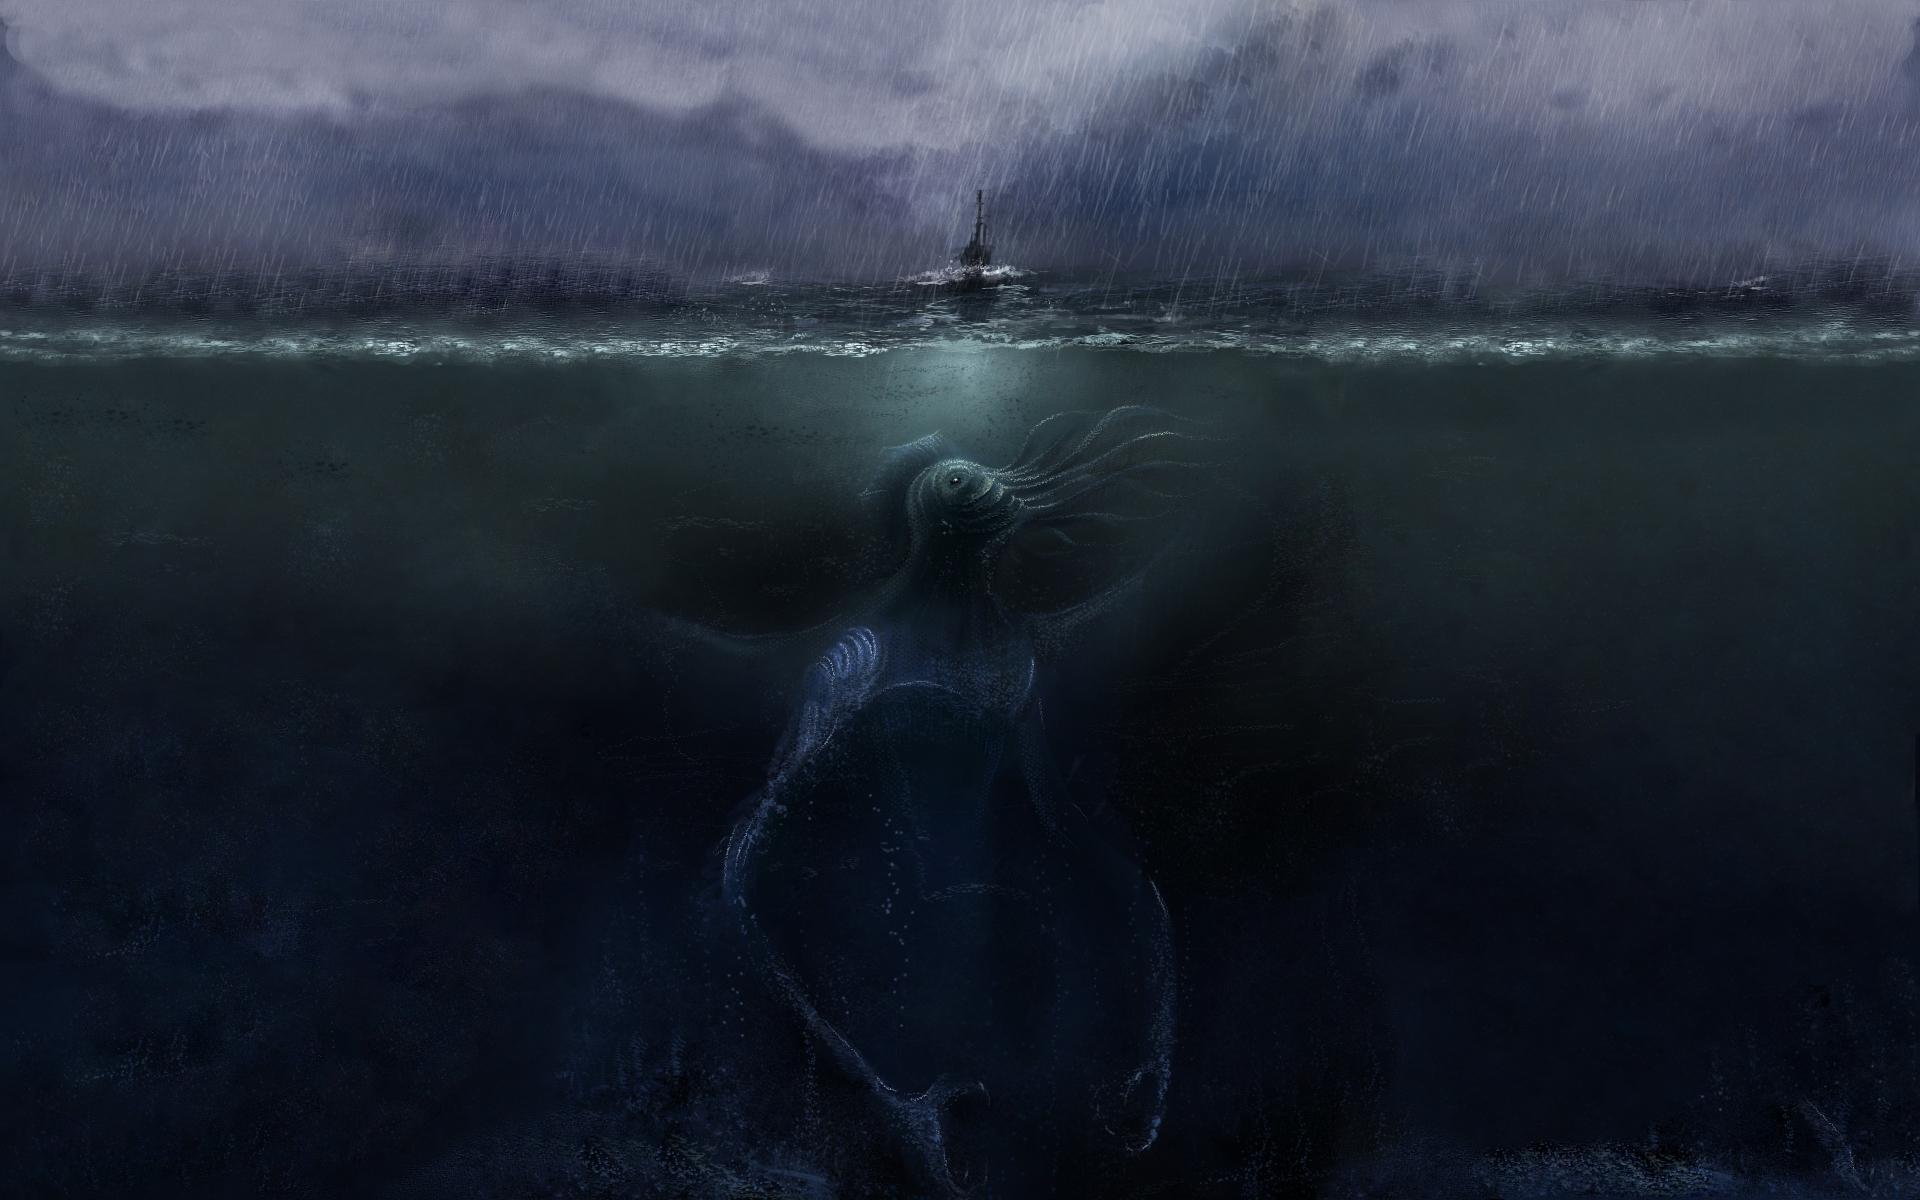 My wallpaper for two years. Reminds me the only thing scarier than the ocean is our imagination